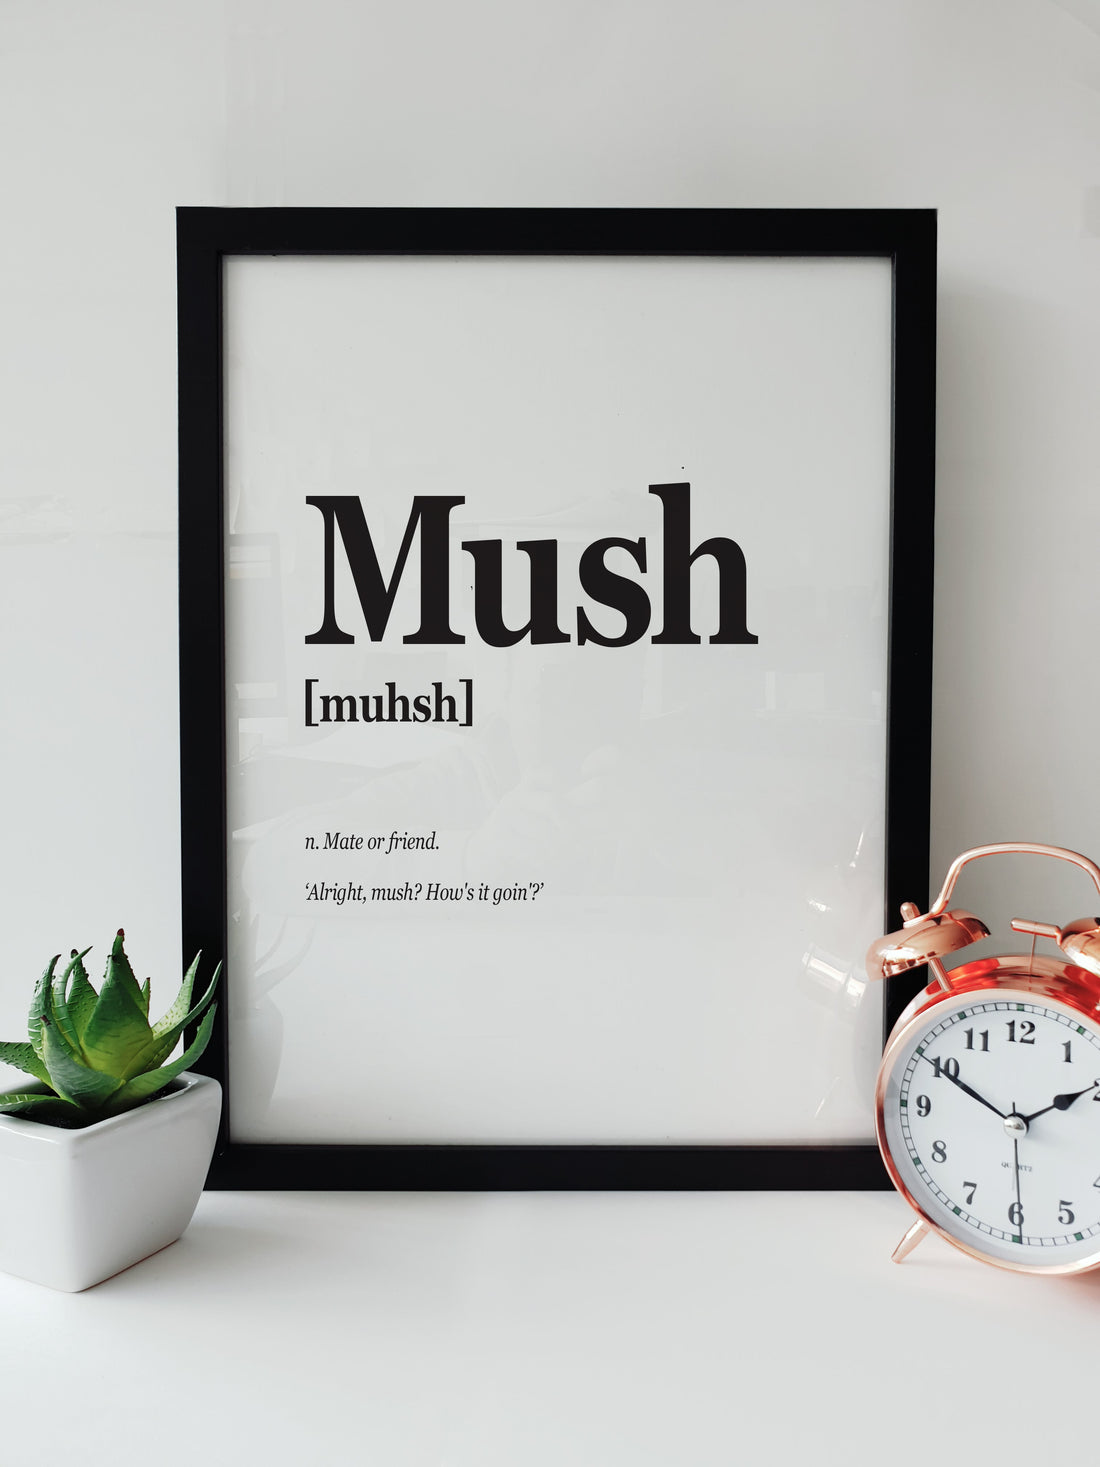 Framed Portsmouth Dialect Print featuring the word "Mush" with pronunciation and definition, displayed on a white desk with a plant and a copper alarm clock. Pompey translation designed by local lingo